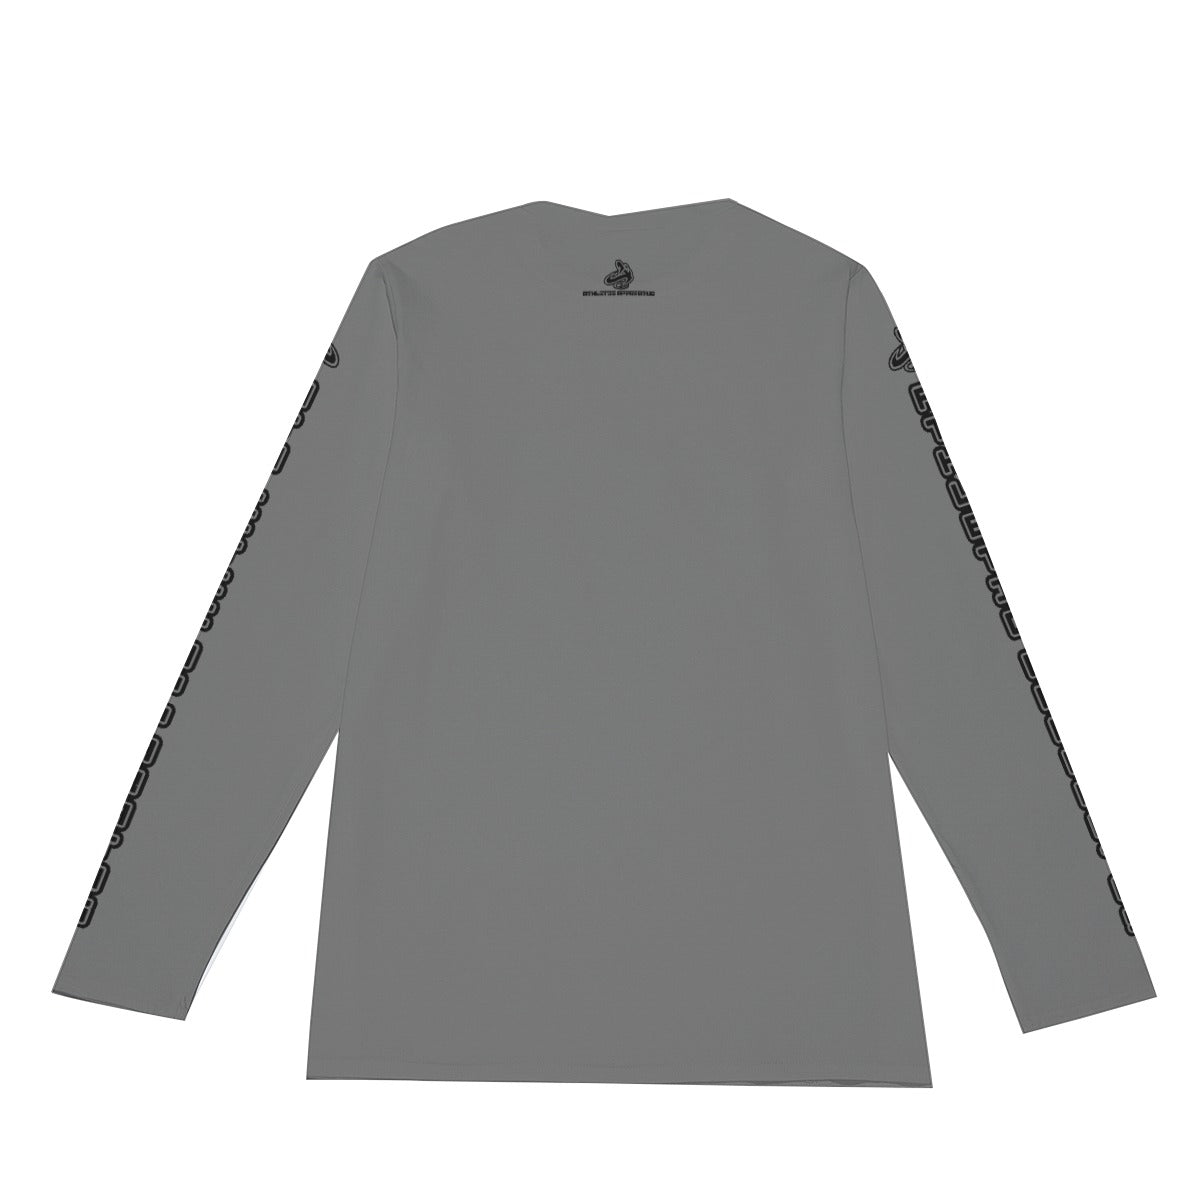 
                  
                    A.A. Grey BL Long Sleeve Courage fuels greatness
                  
                